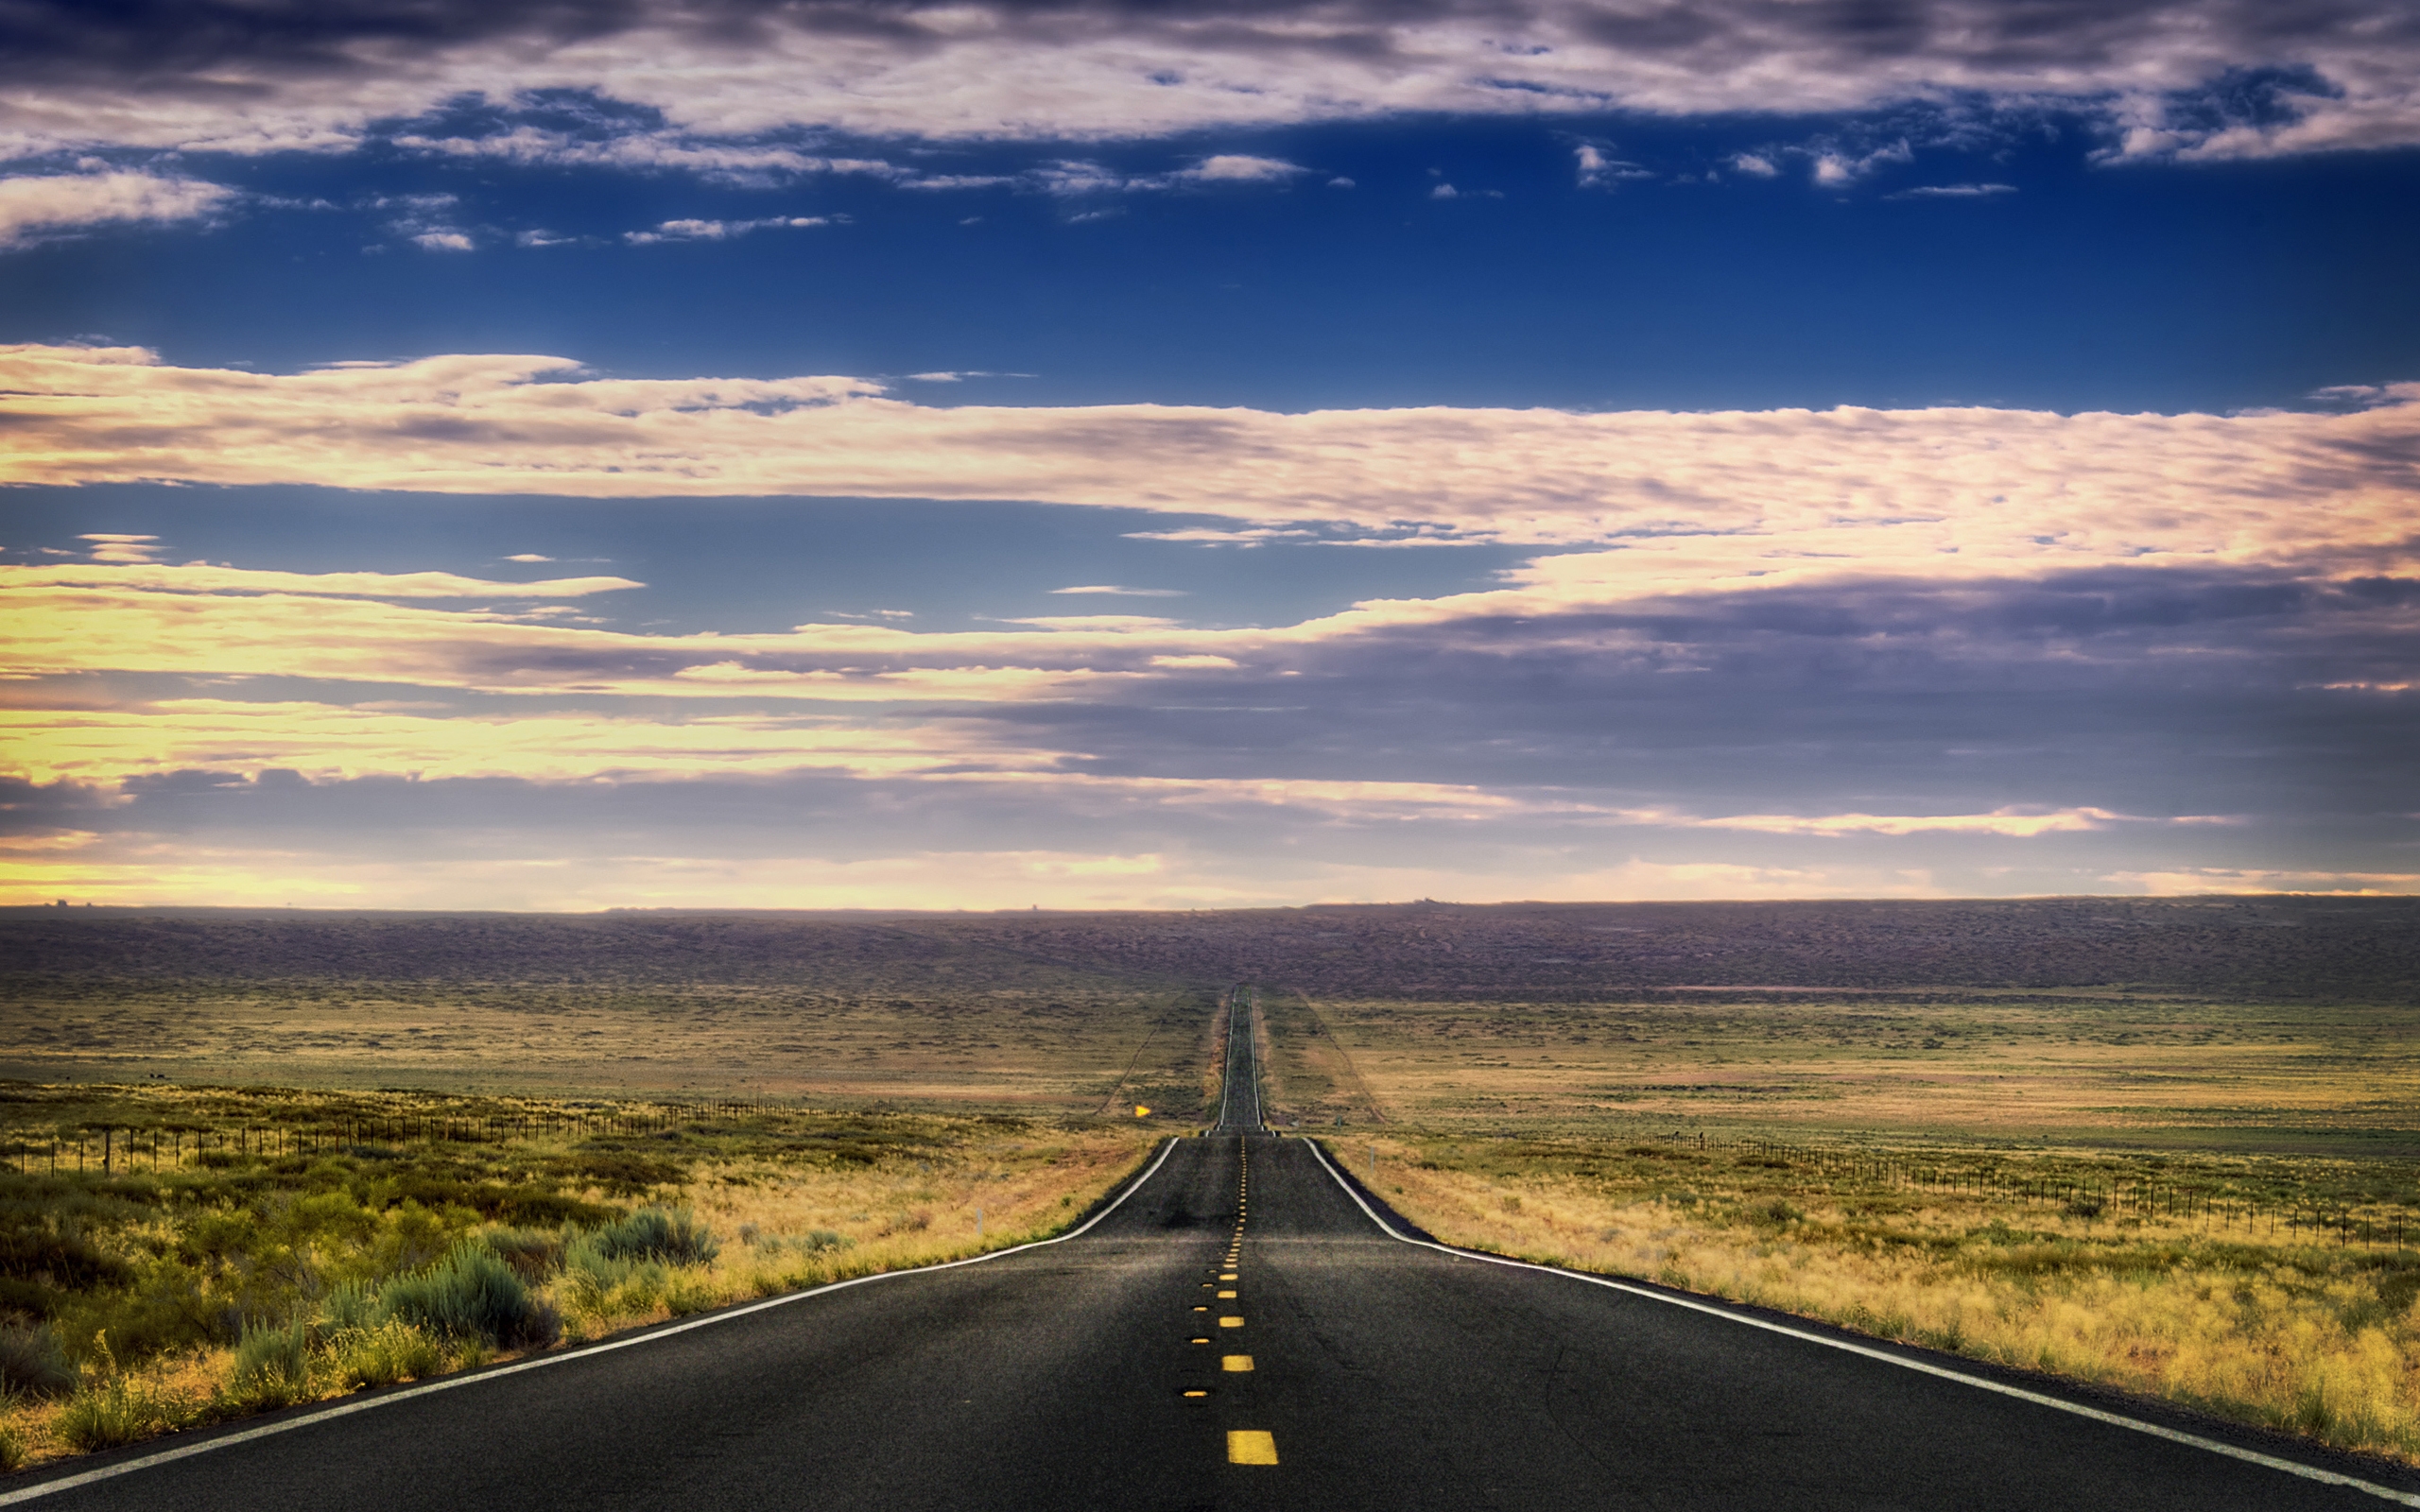 The long road wallpaper the endless fields of 2560x1600 Wallpapers 3d